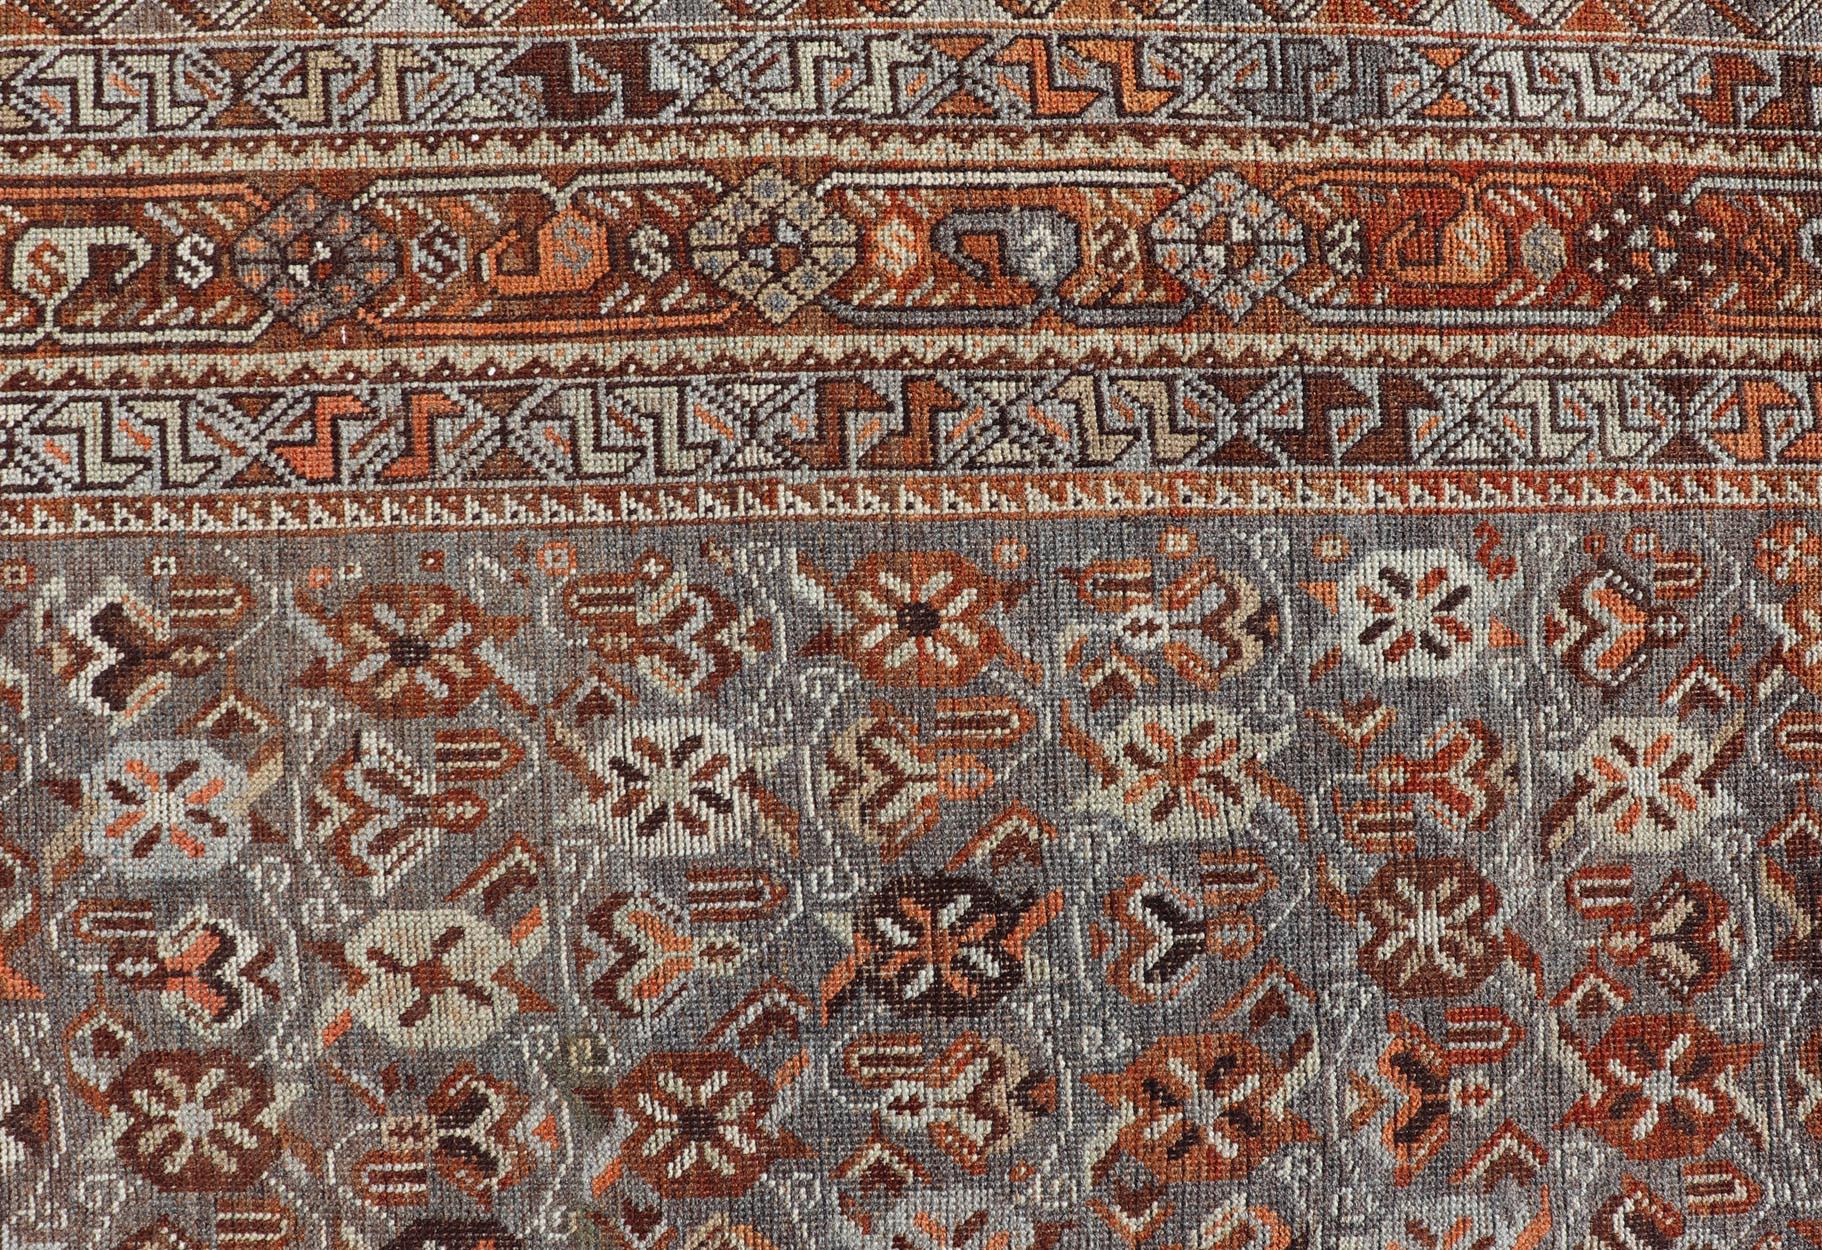 Measures: 6'10 x 9'0 
Geometric Persian Shiraz Rug with Tri-Medallion Design in Shades Orange and Blue. Arts / rug EMB-22132-15042, country of origin / type: Iran / Shiraz, circa 1910.

This Persian Shiraz rug (circa early 20th century) features